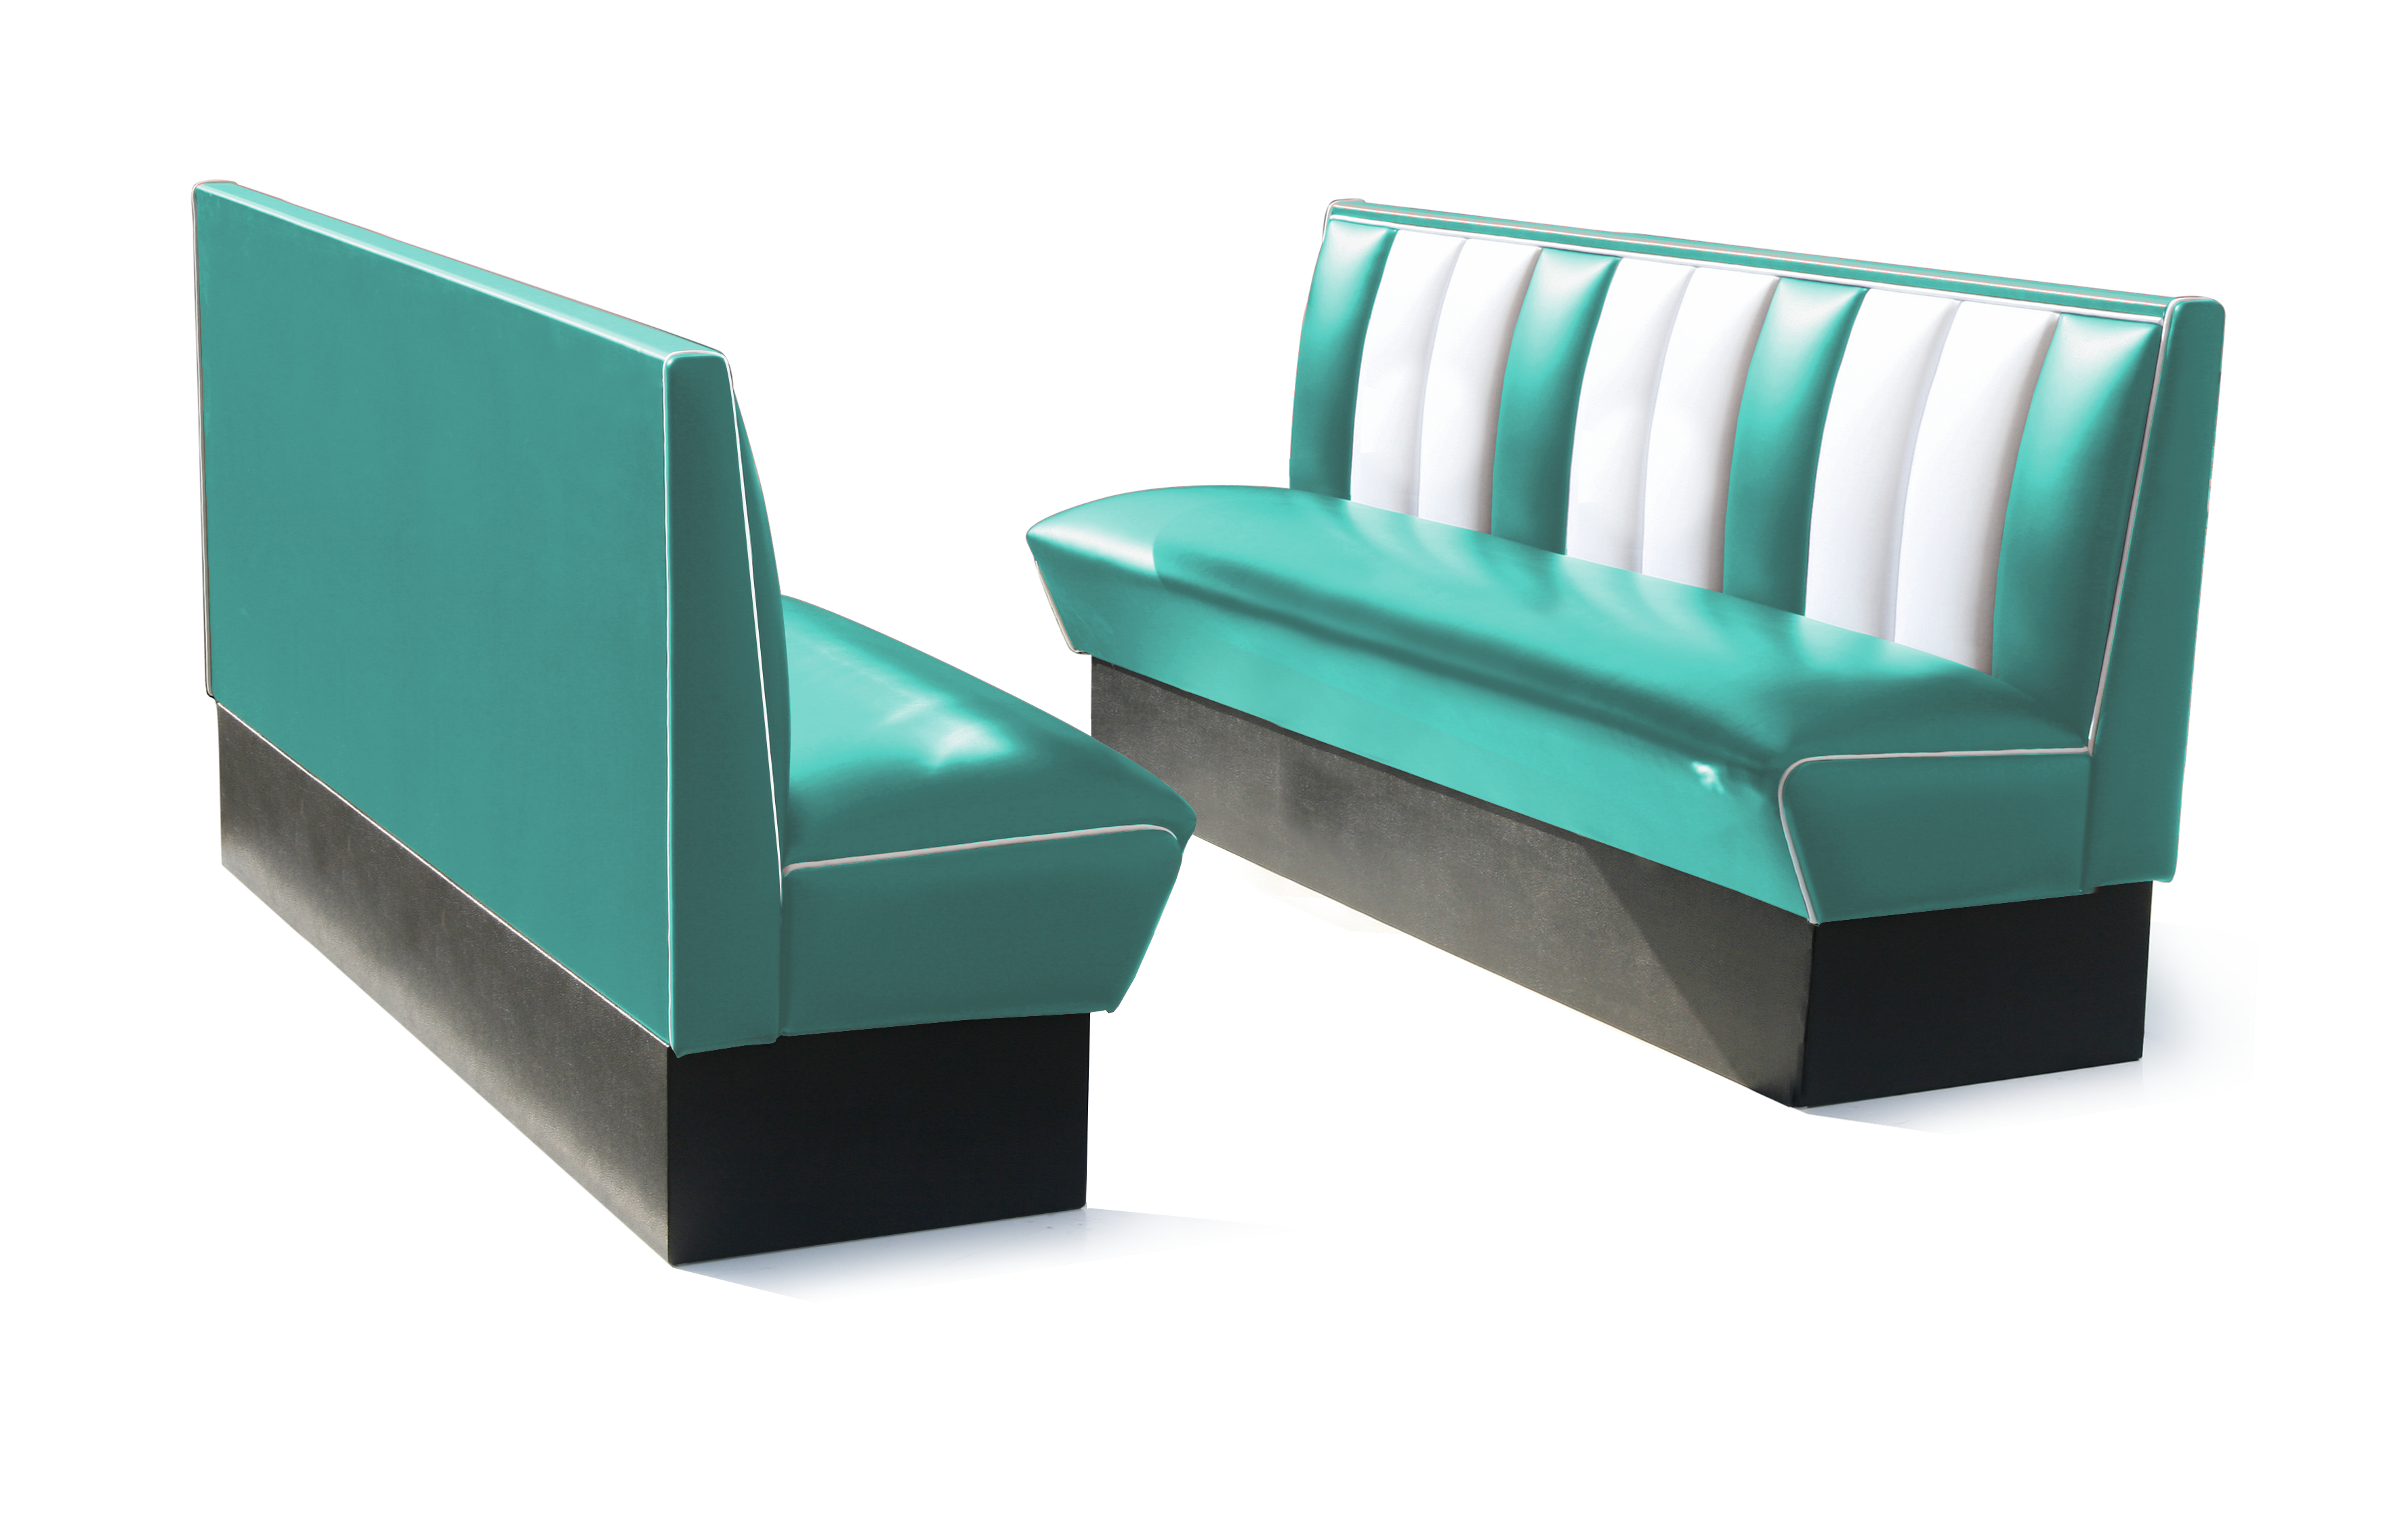 Retro Furniture Diner Booth - Hollywood Eight Seater Set